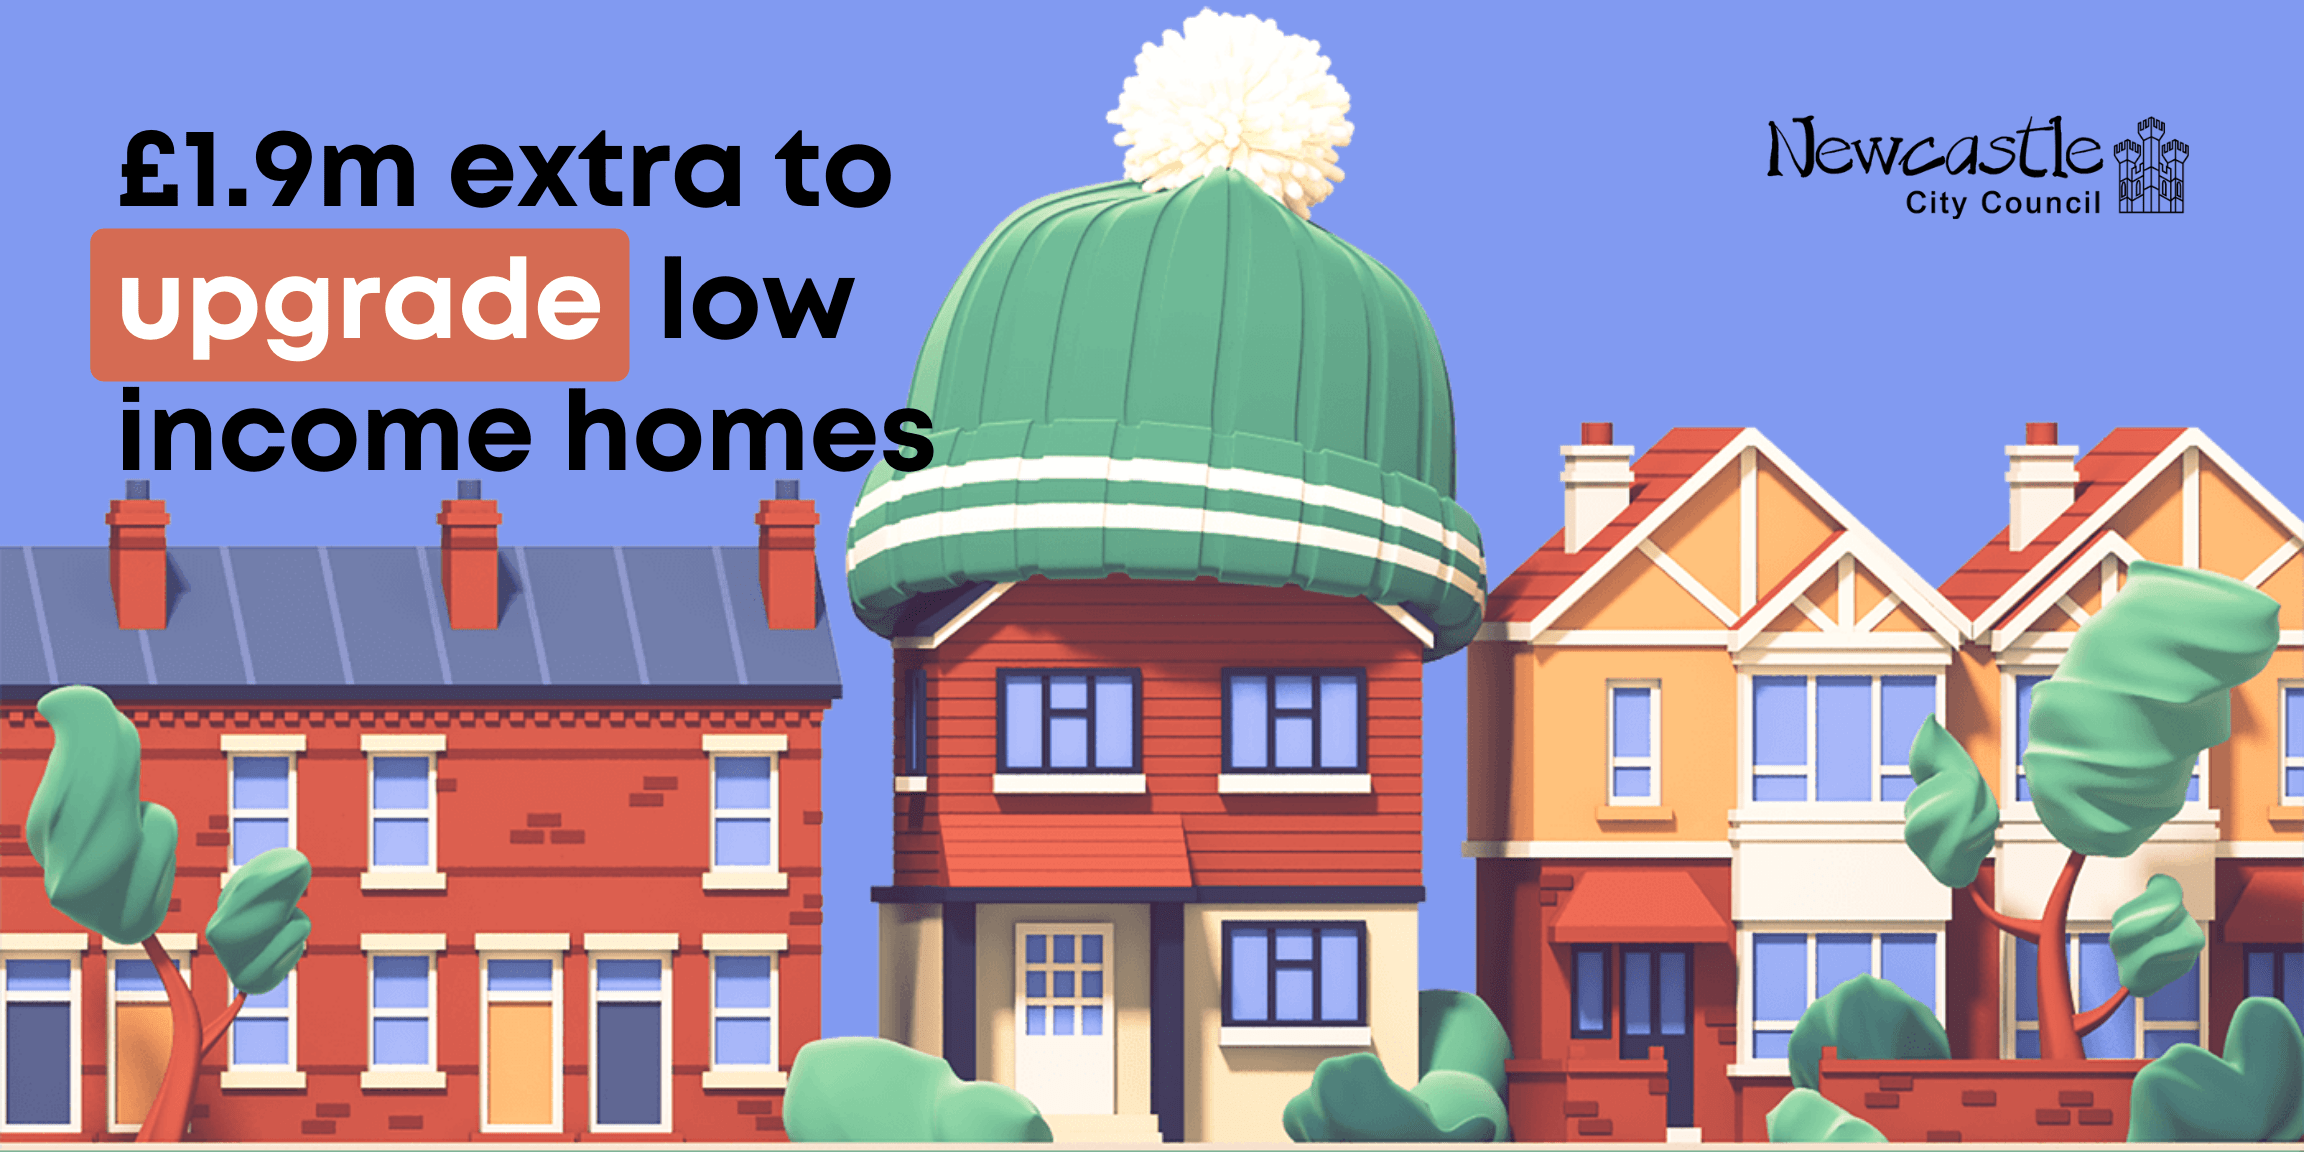 A cartoon of a house in a woolly hat with the text "£1.9m extra to upgrade low income homes"